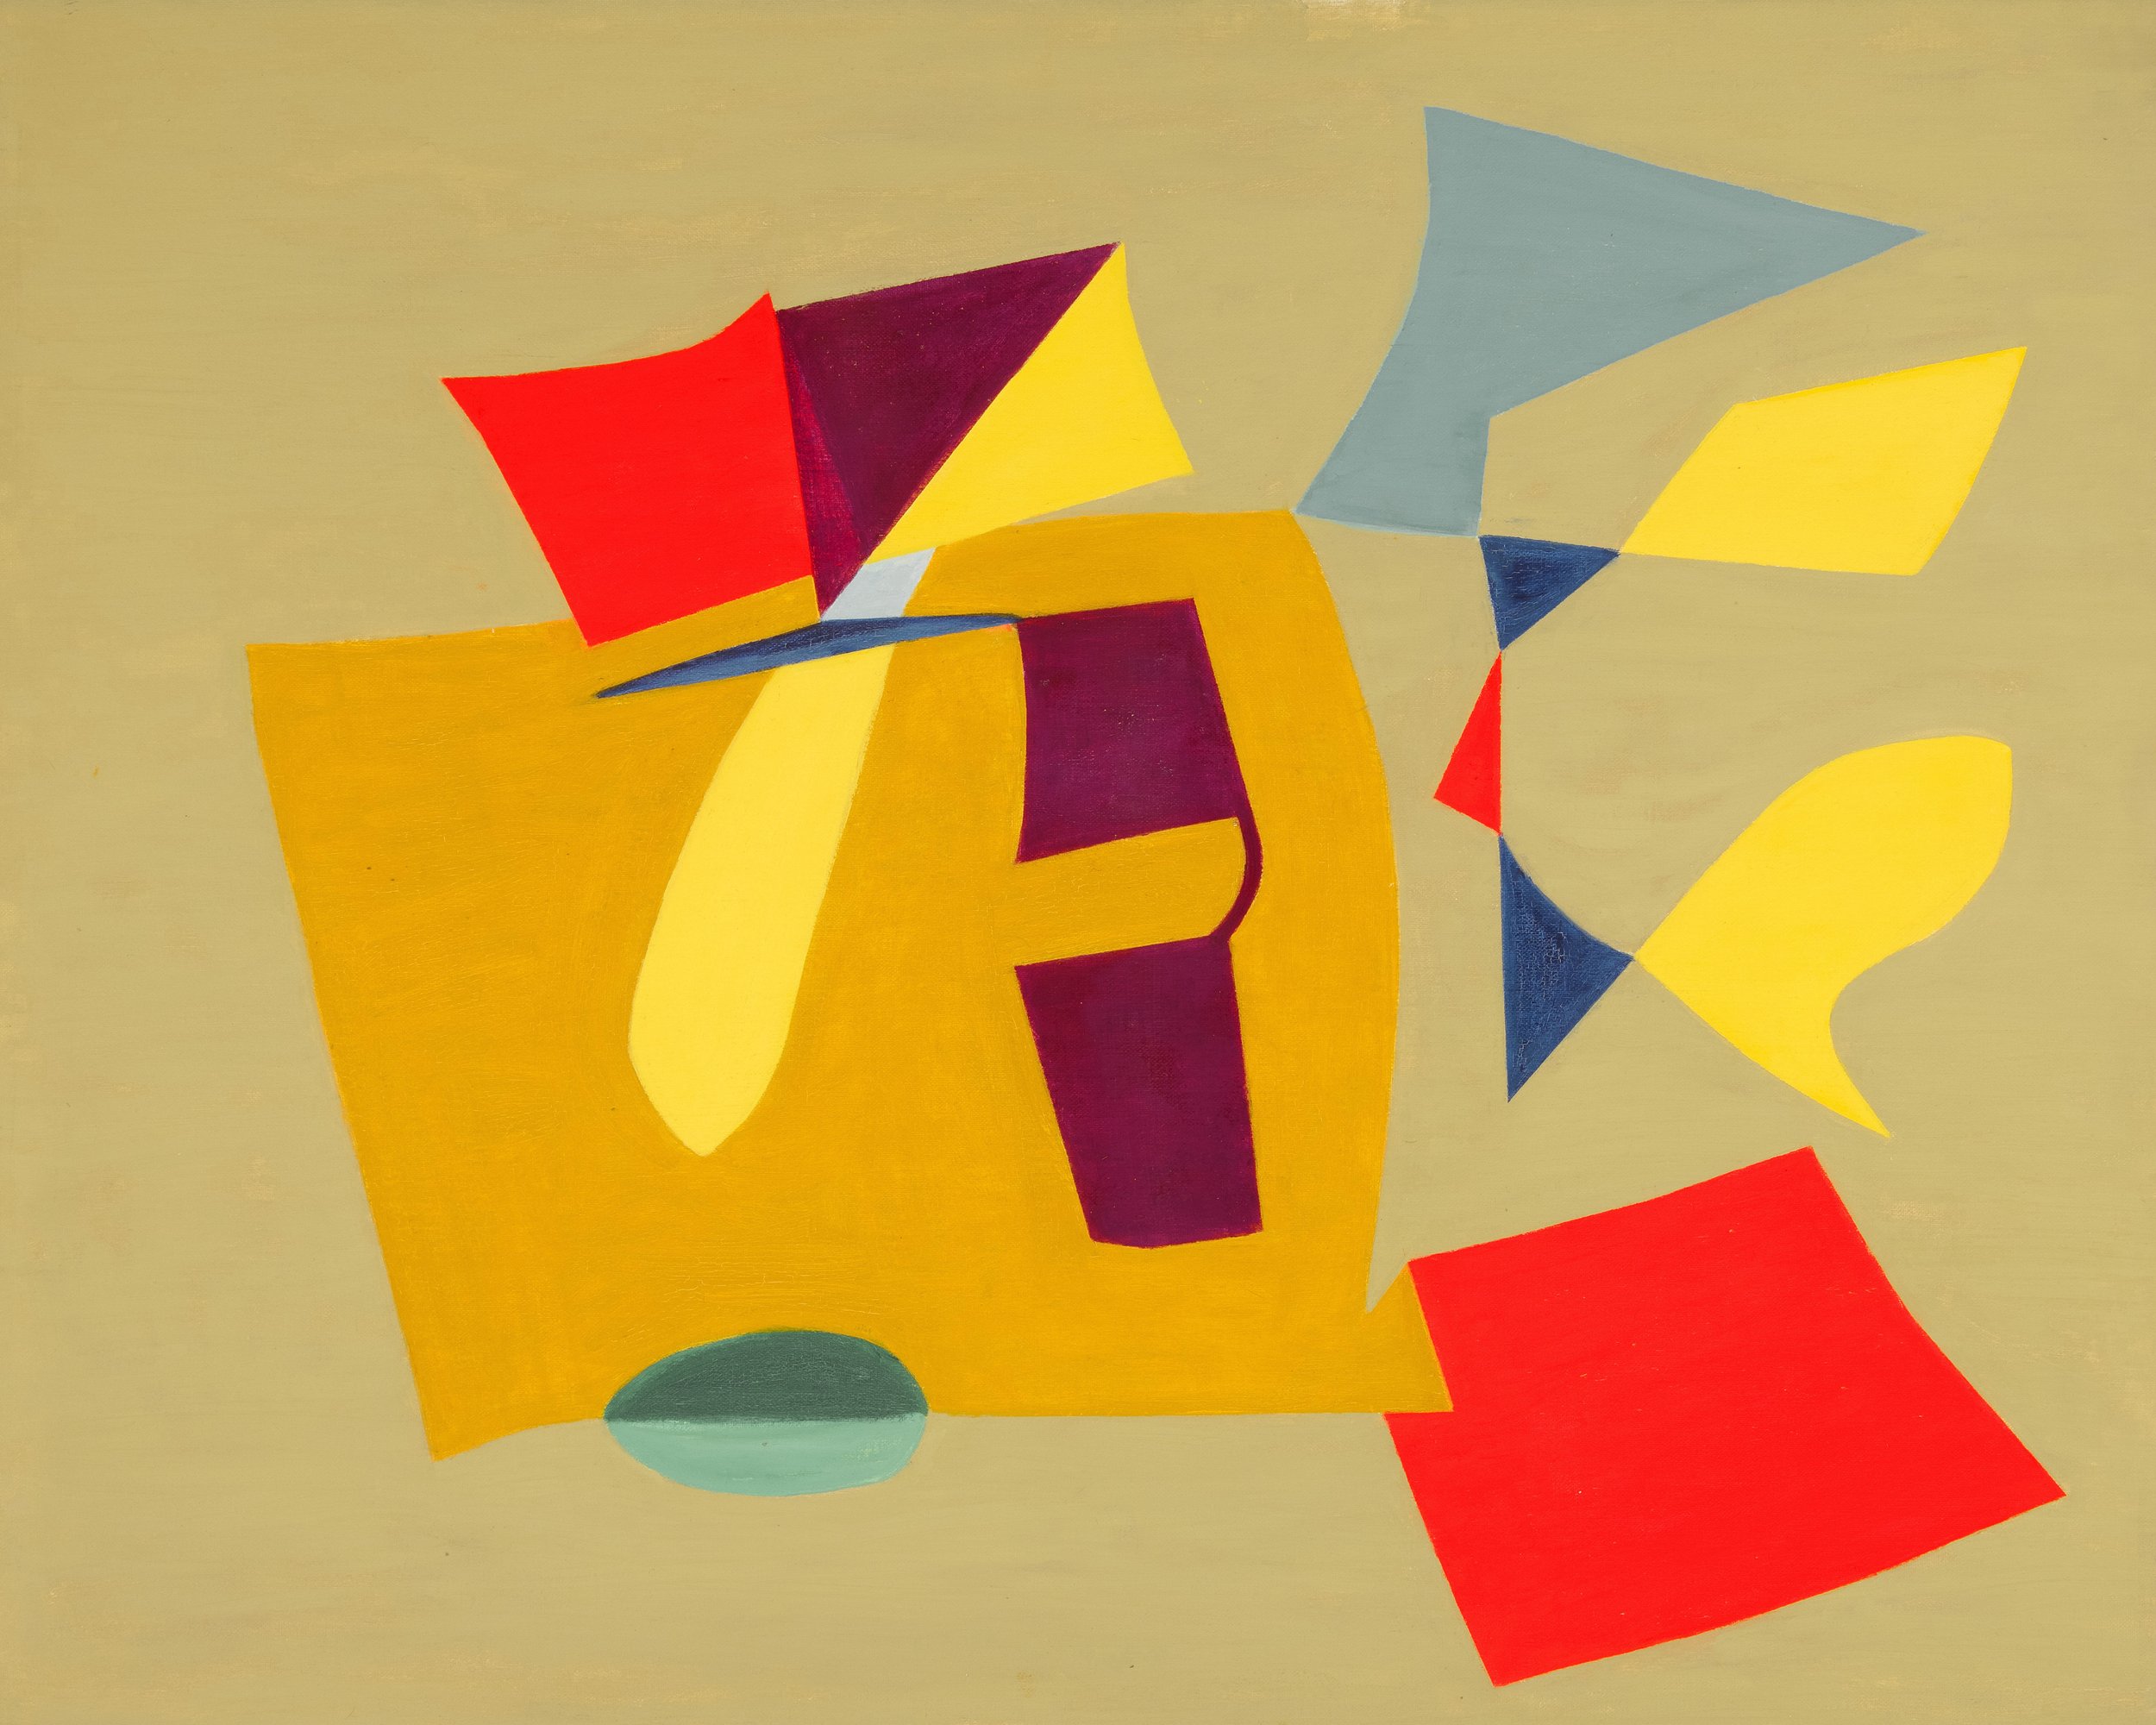 Geometric abstraction of flat planes in yellow, maroon, blue, red, and green on a mustard background.